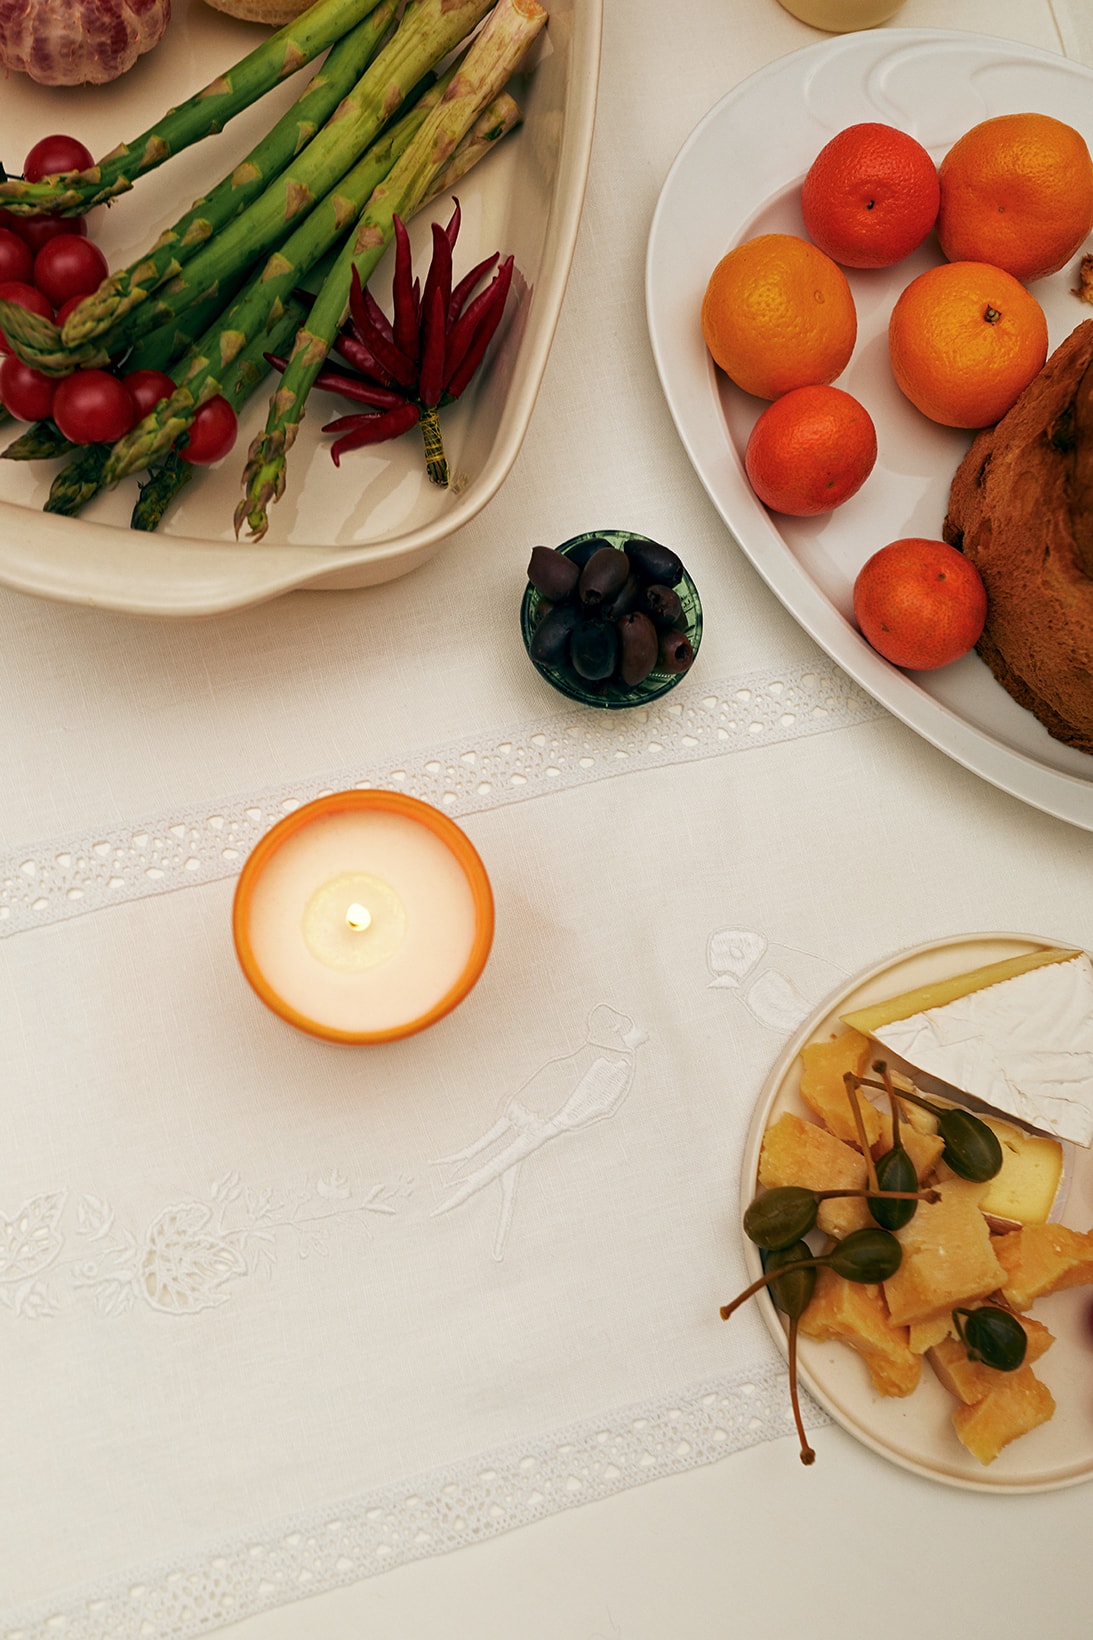 sleeper home homeware decor collection candle plates asparagus food fruits orange table cloth white